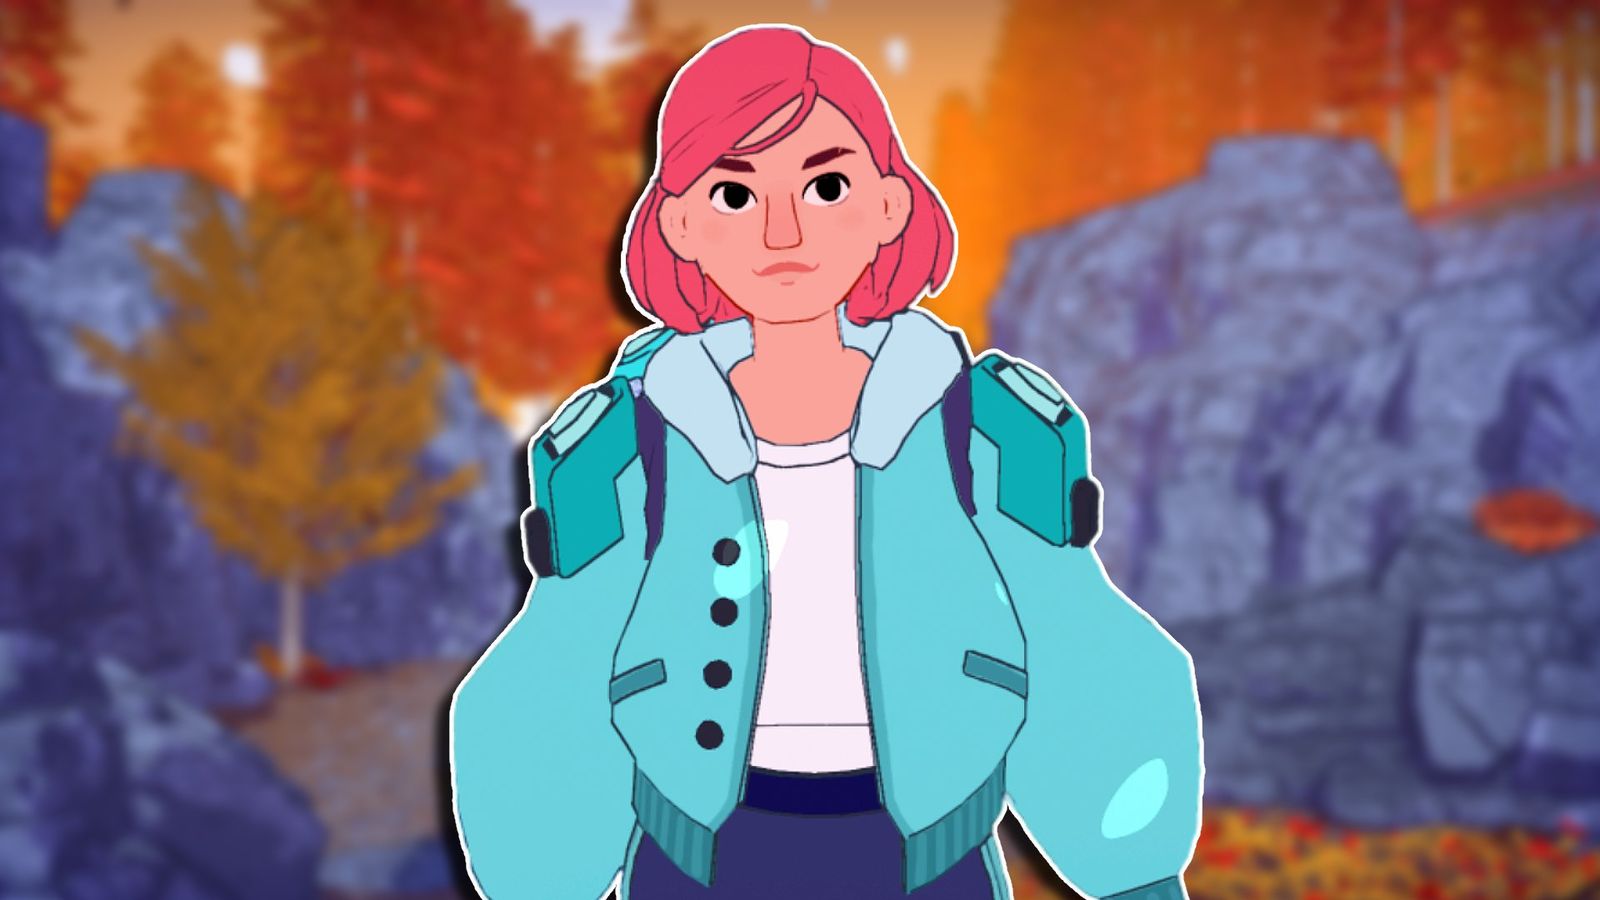 A close up of Luisa from Dungeons of Hinterberg, a young woman with pink hair and a blue jacket, standing in a slightly blurred autumnal forest.